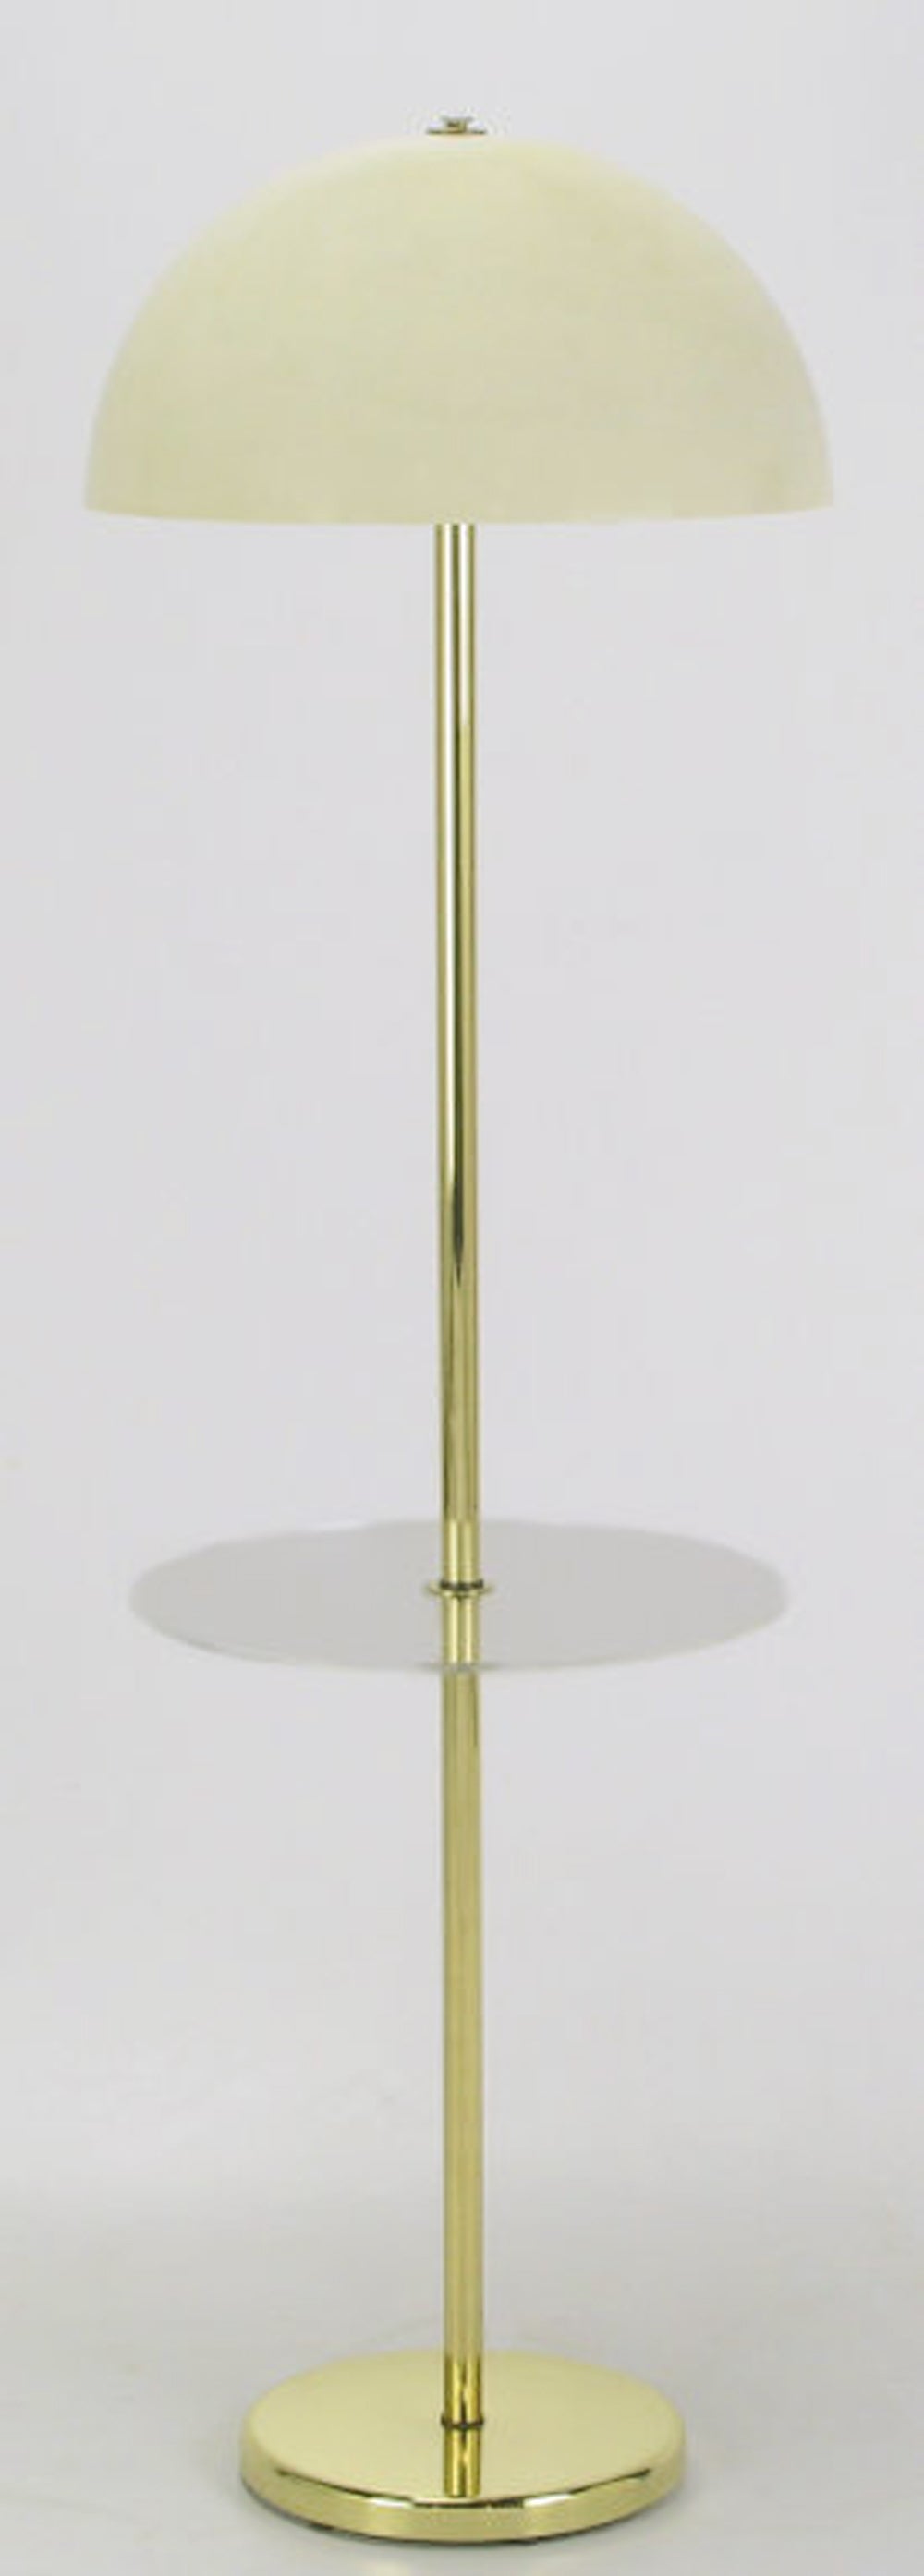 Nessen Brass Floor Lamp with Hemispherical Shade and Lucite Table